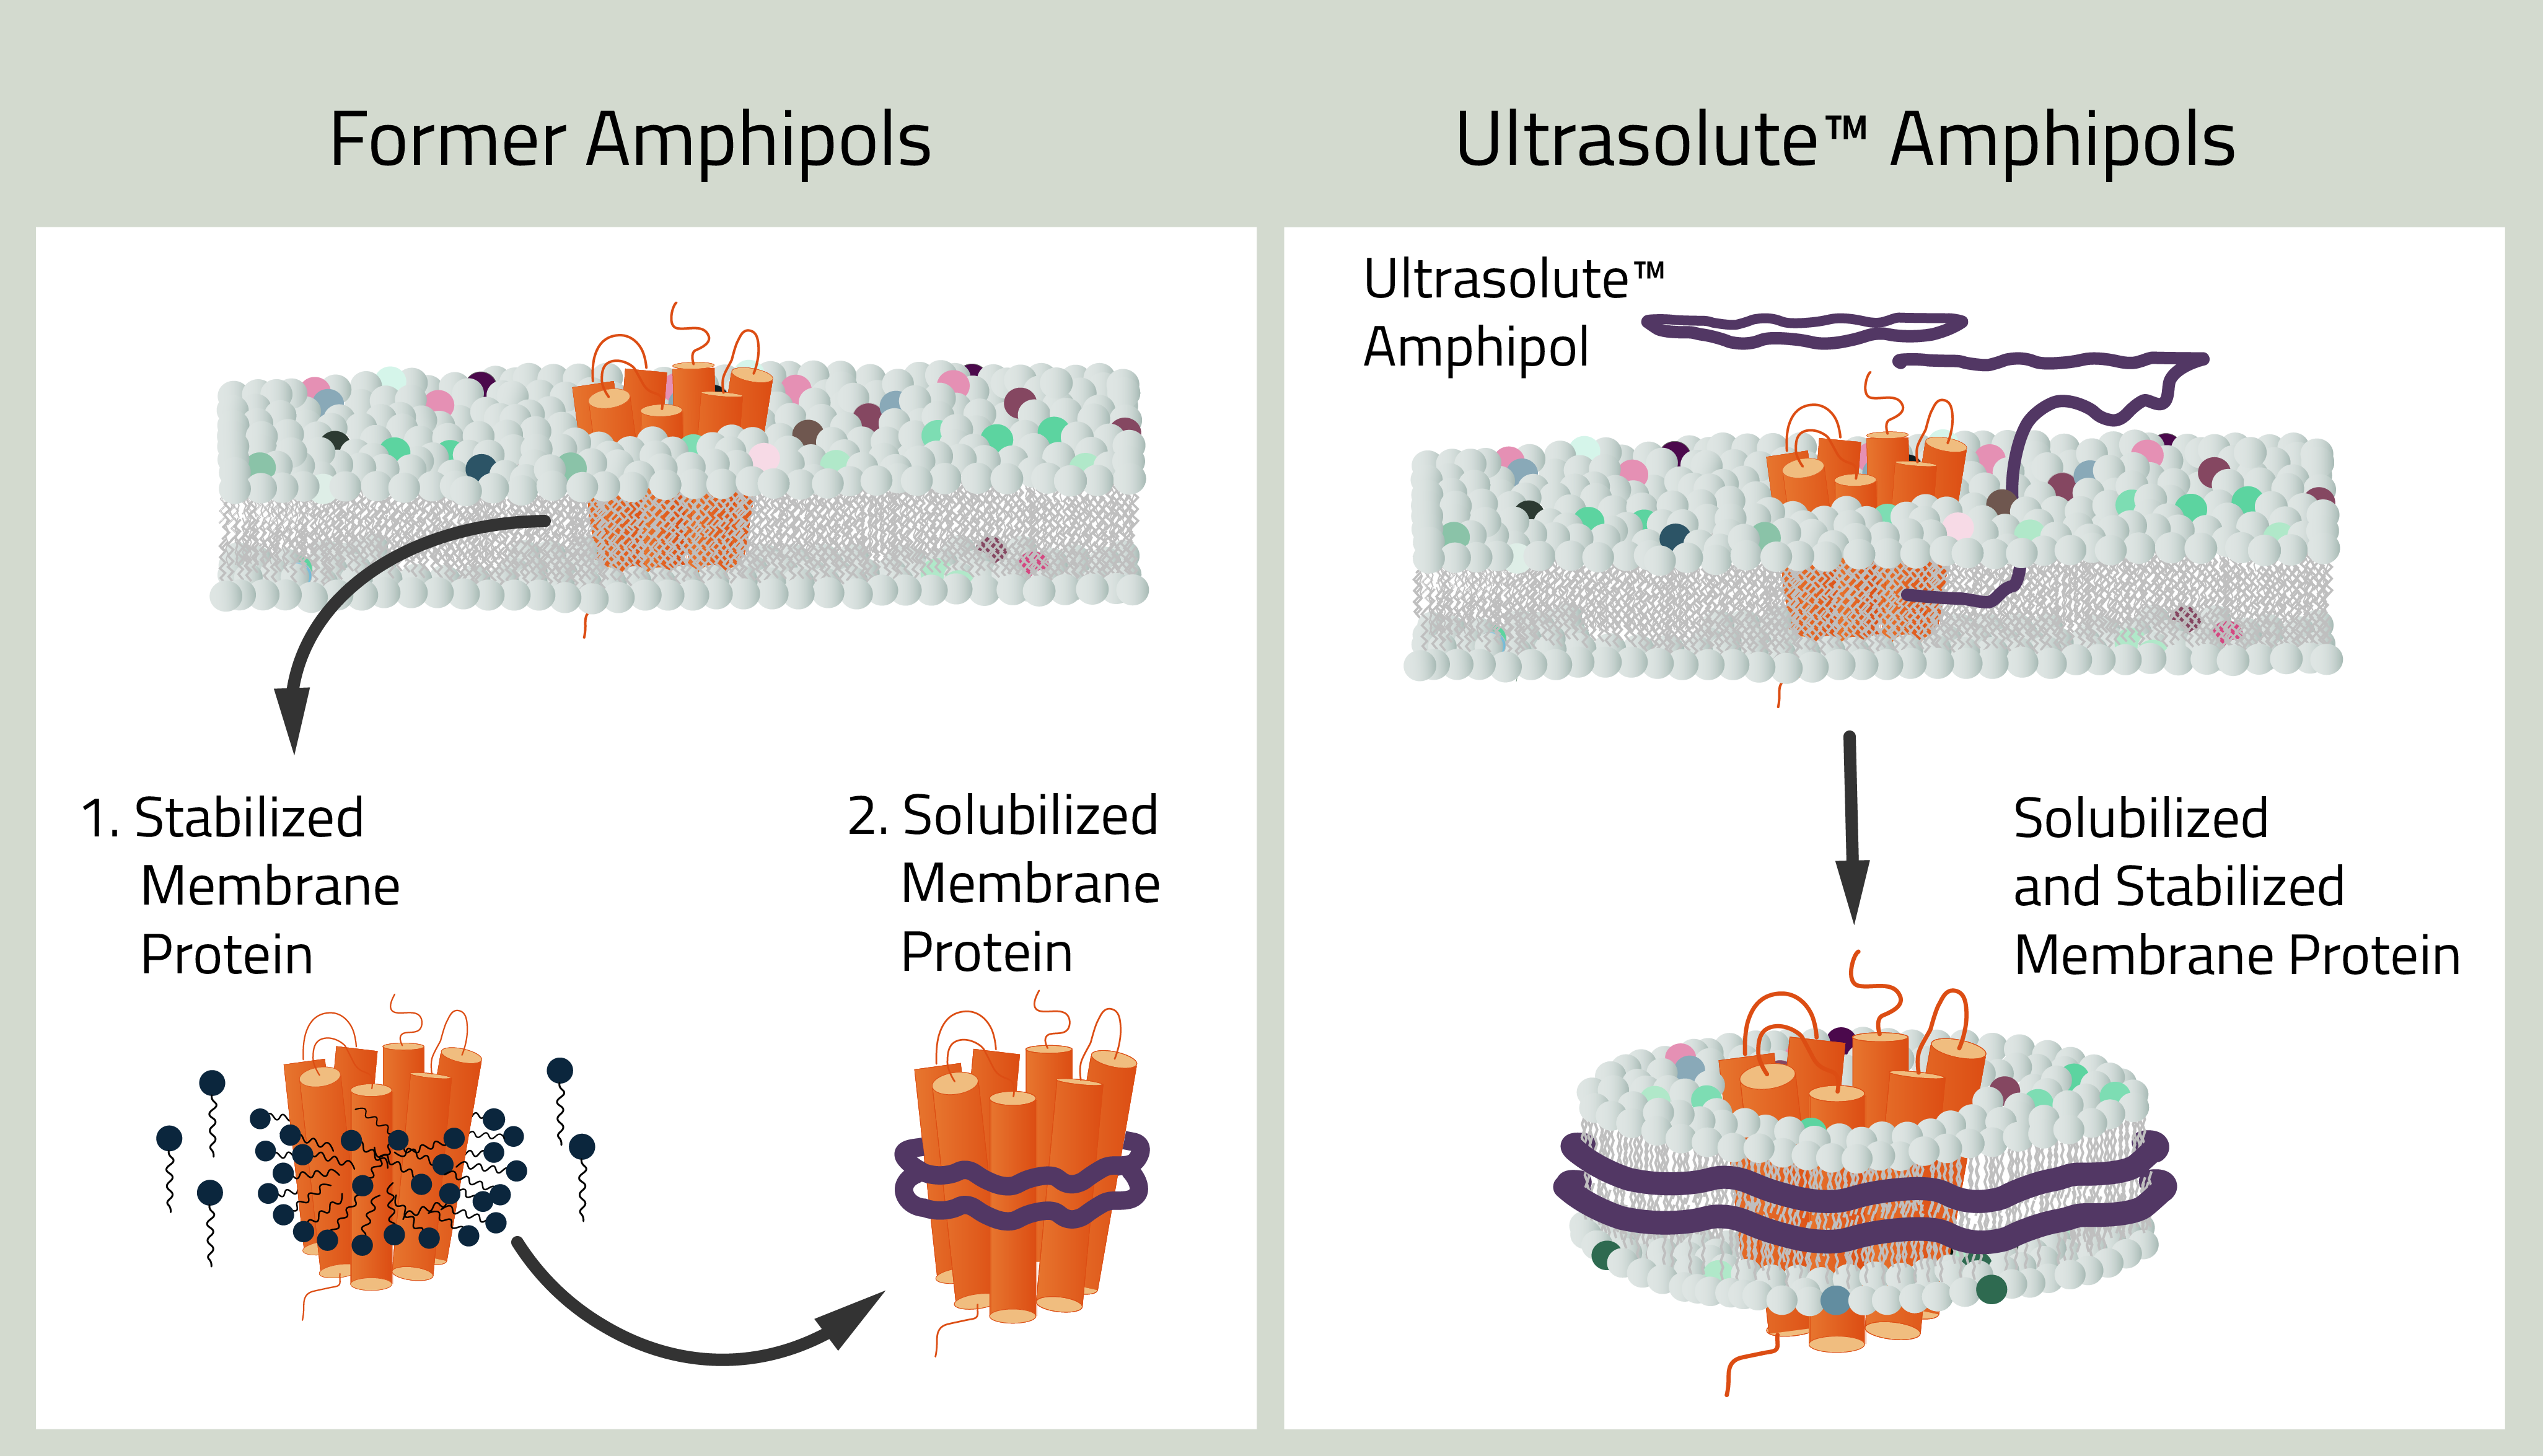 Comparison between old and new Ultrasolute Amphipols